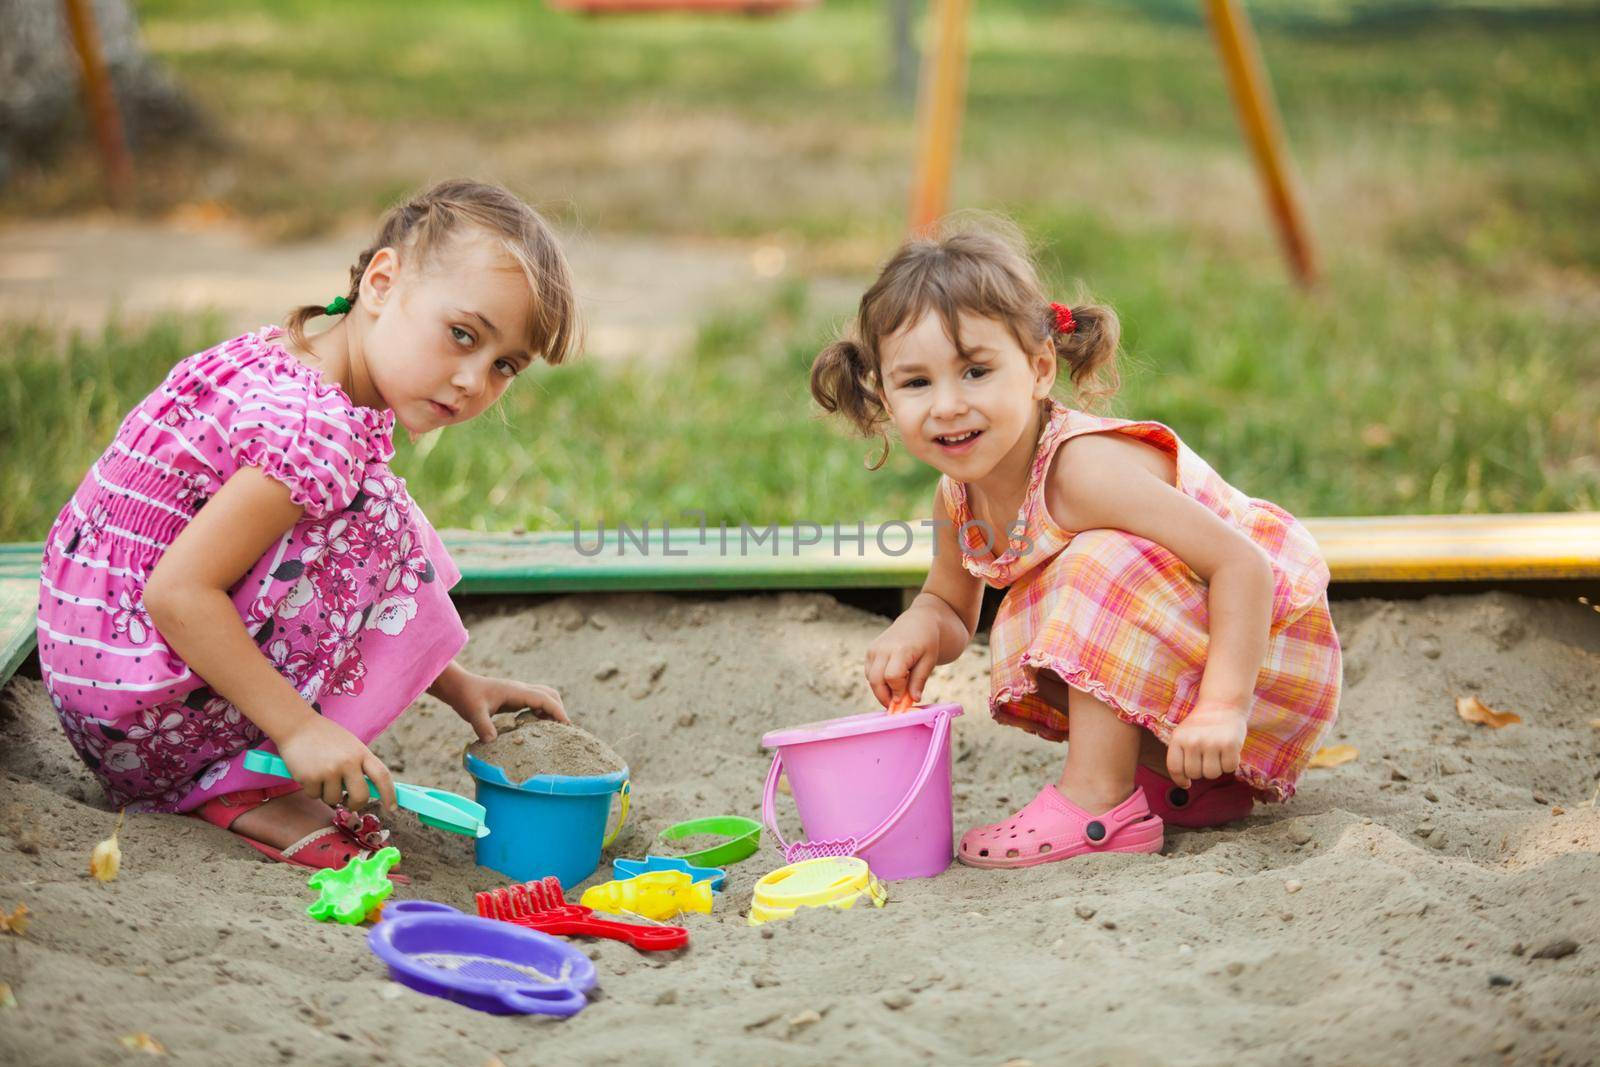 Two girls play in the sandbox at the playground